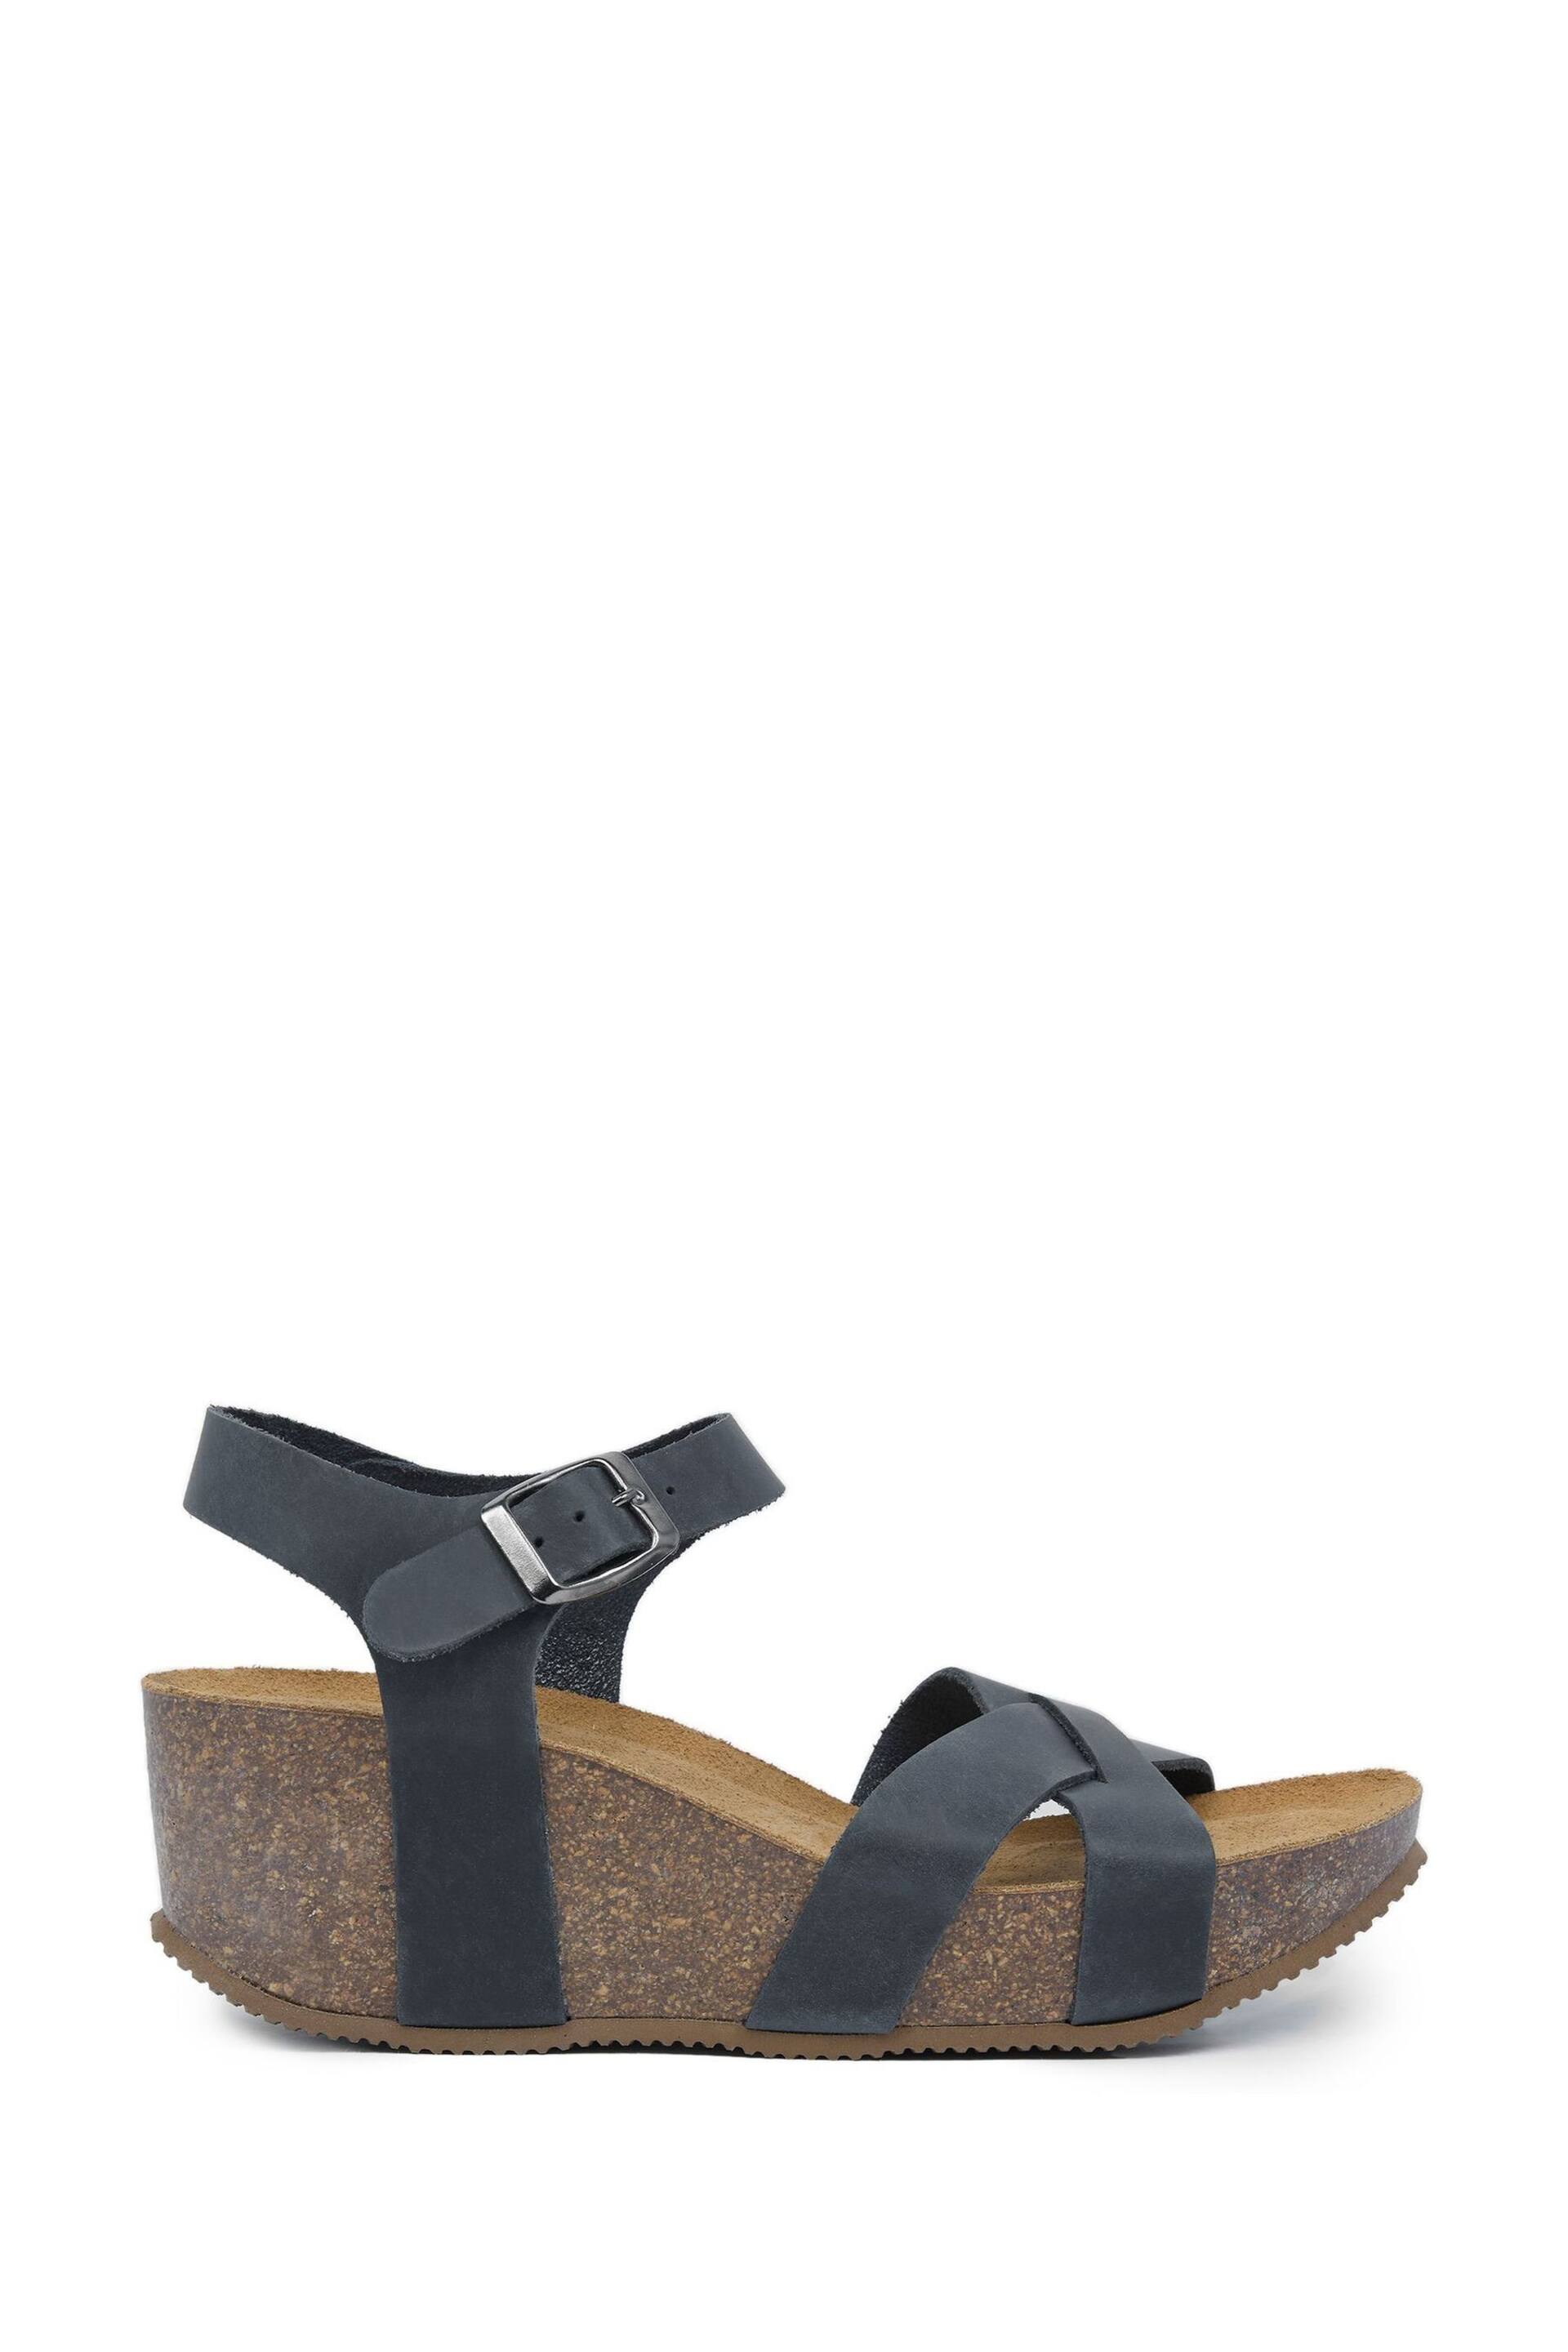 Celtic & Co. Blue Crossover Wedge Sandals - Image 3 of 7